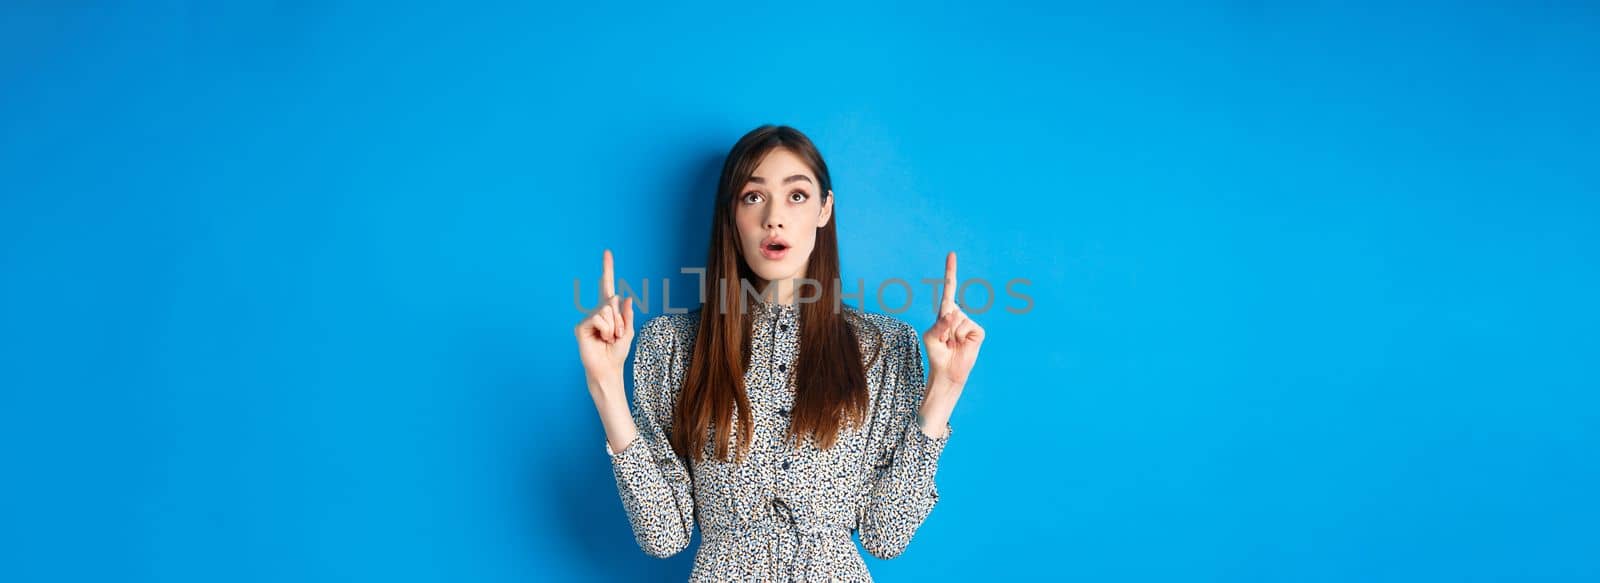 Surprised romantic girl in dress pointing, looking up with opened mouth and fascinated gaze, standing on blue background.